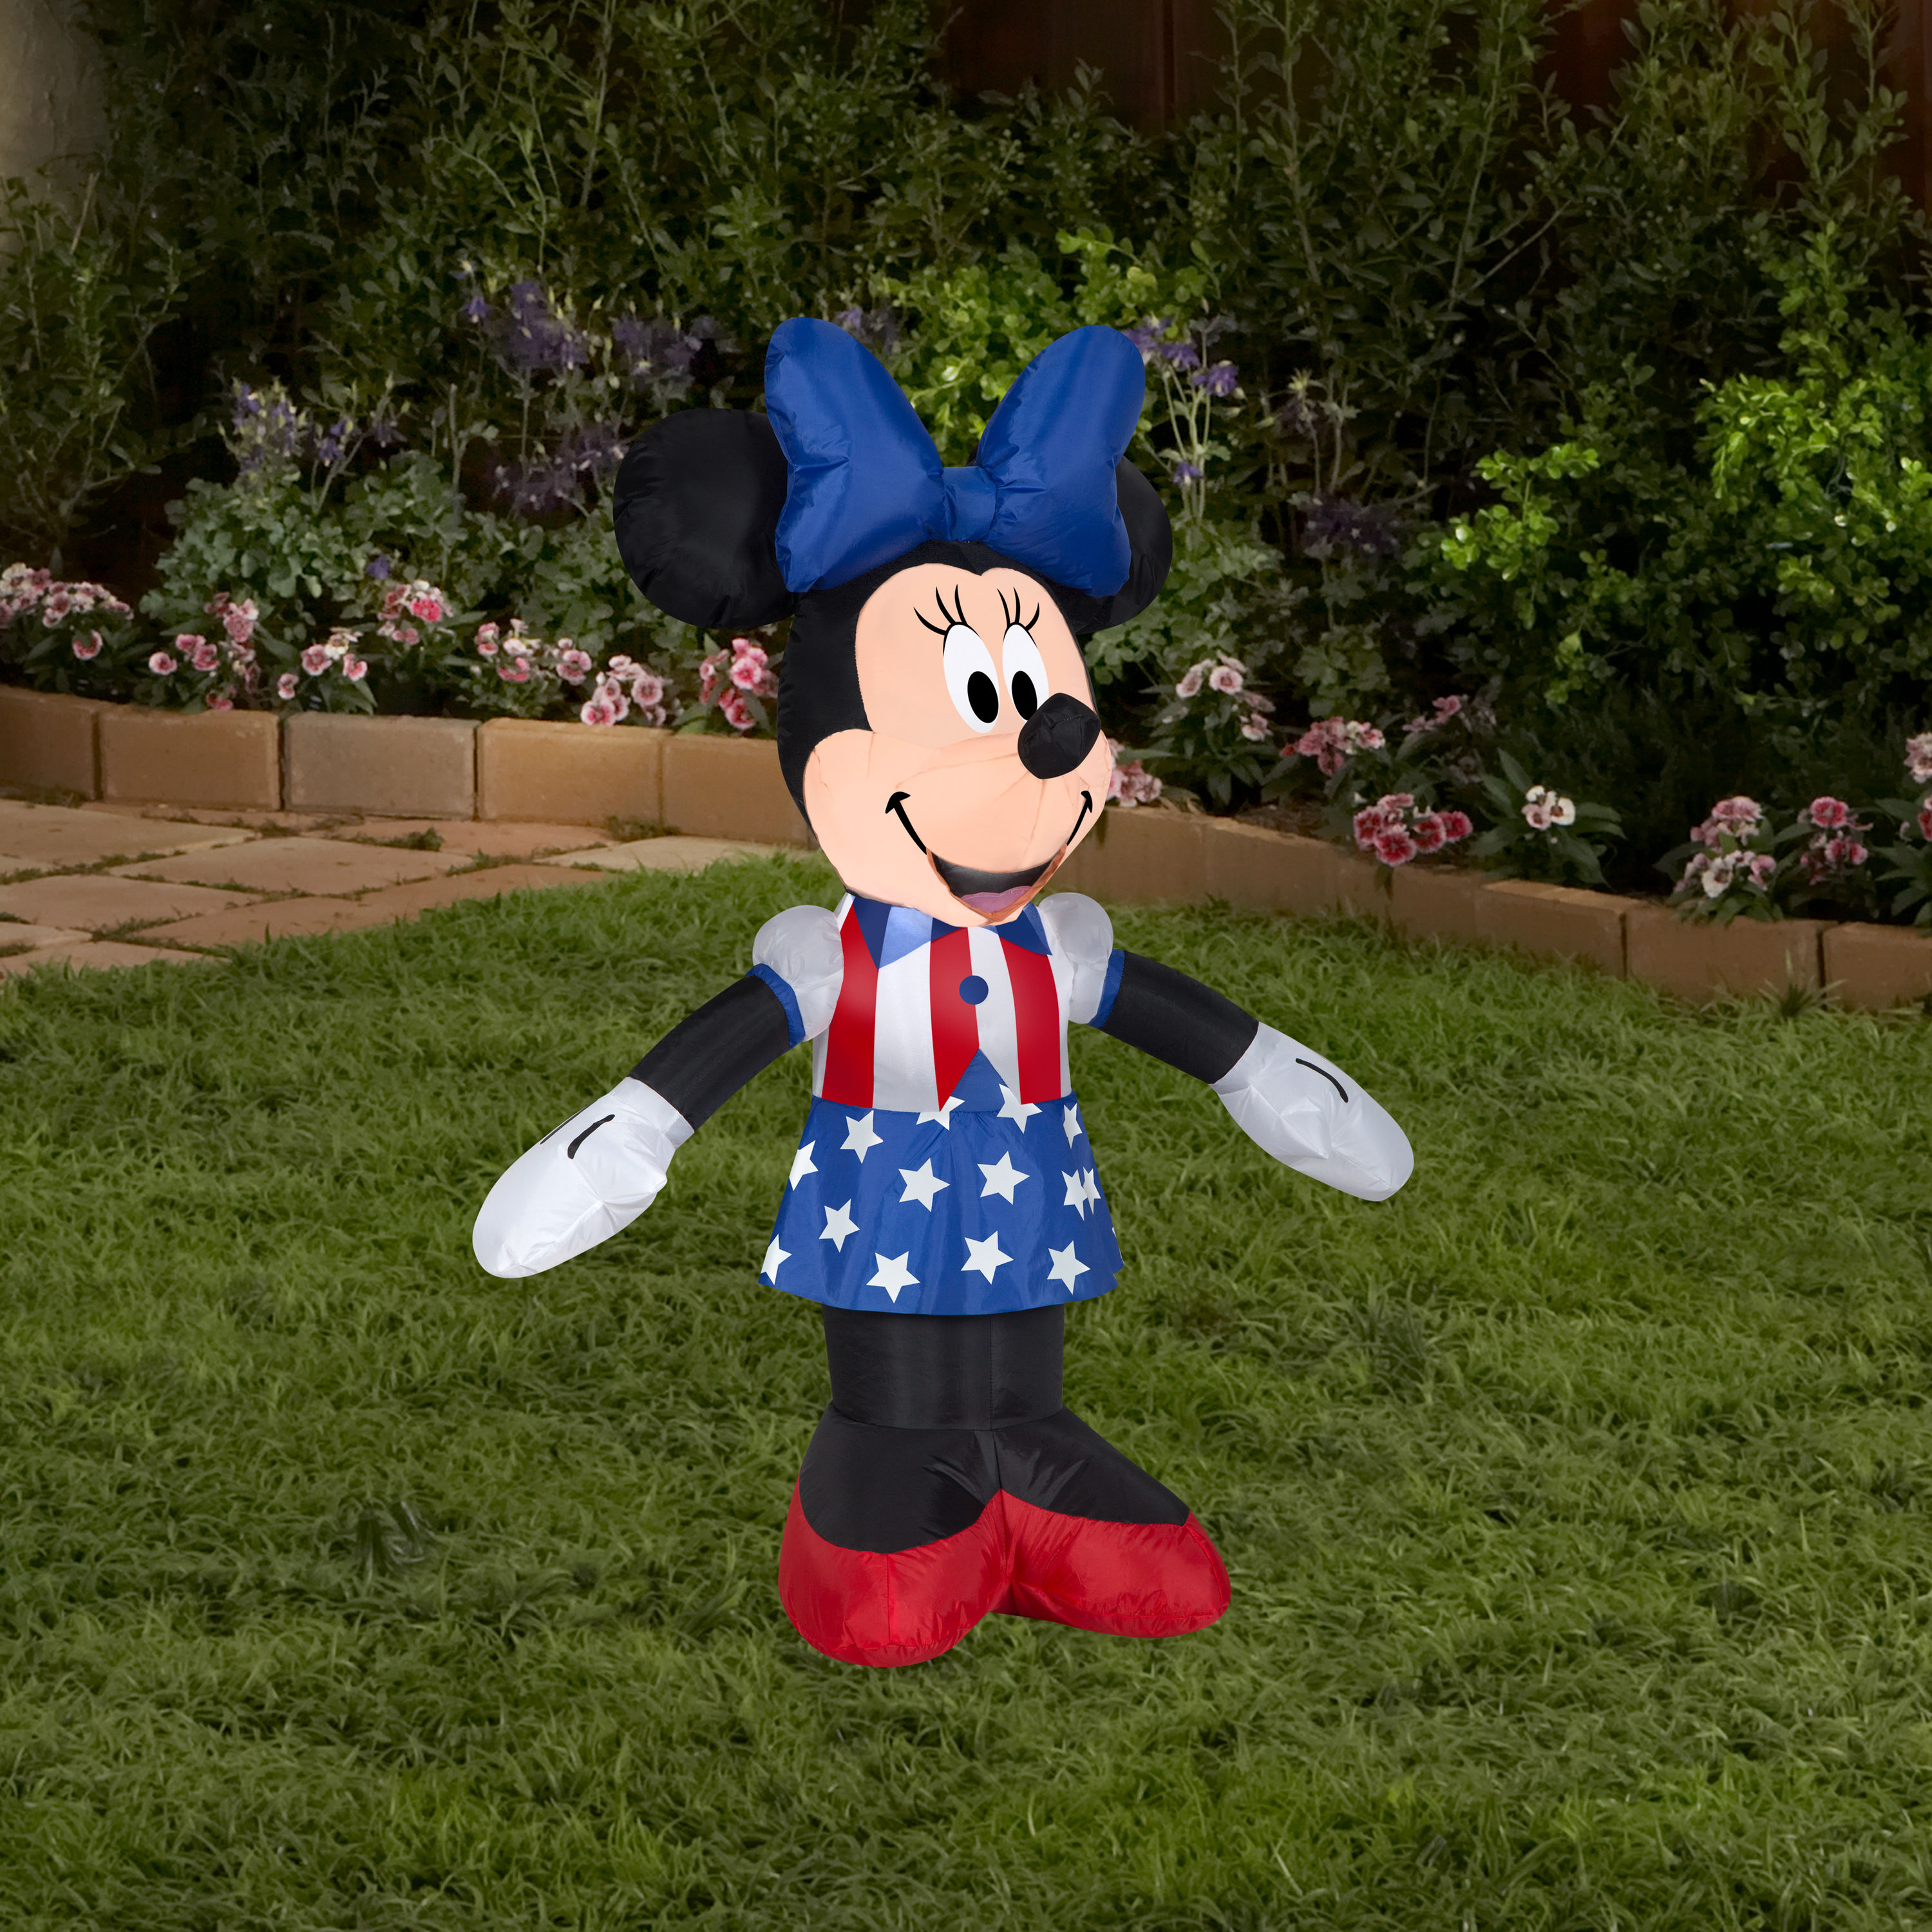 Disney Mickey Mouse 4th of July Patriotic Kitchen Set Towels